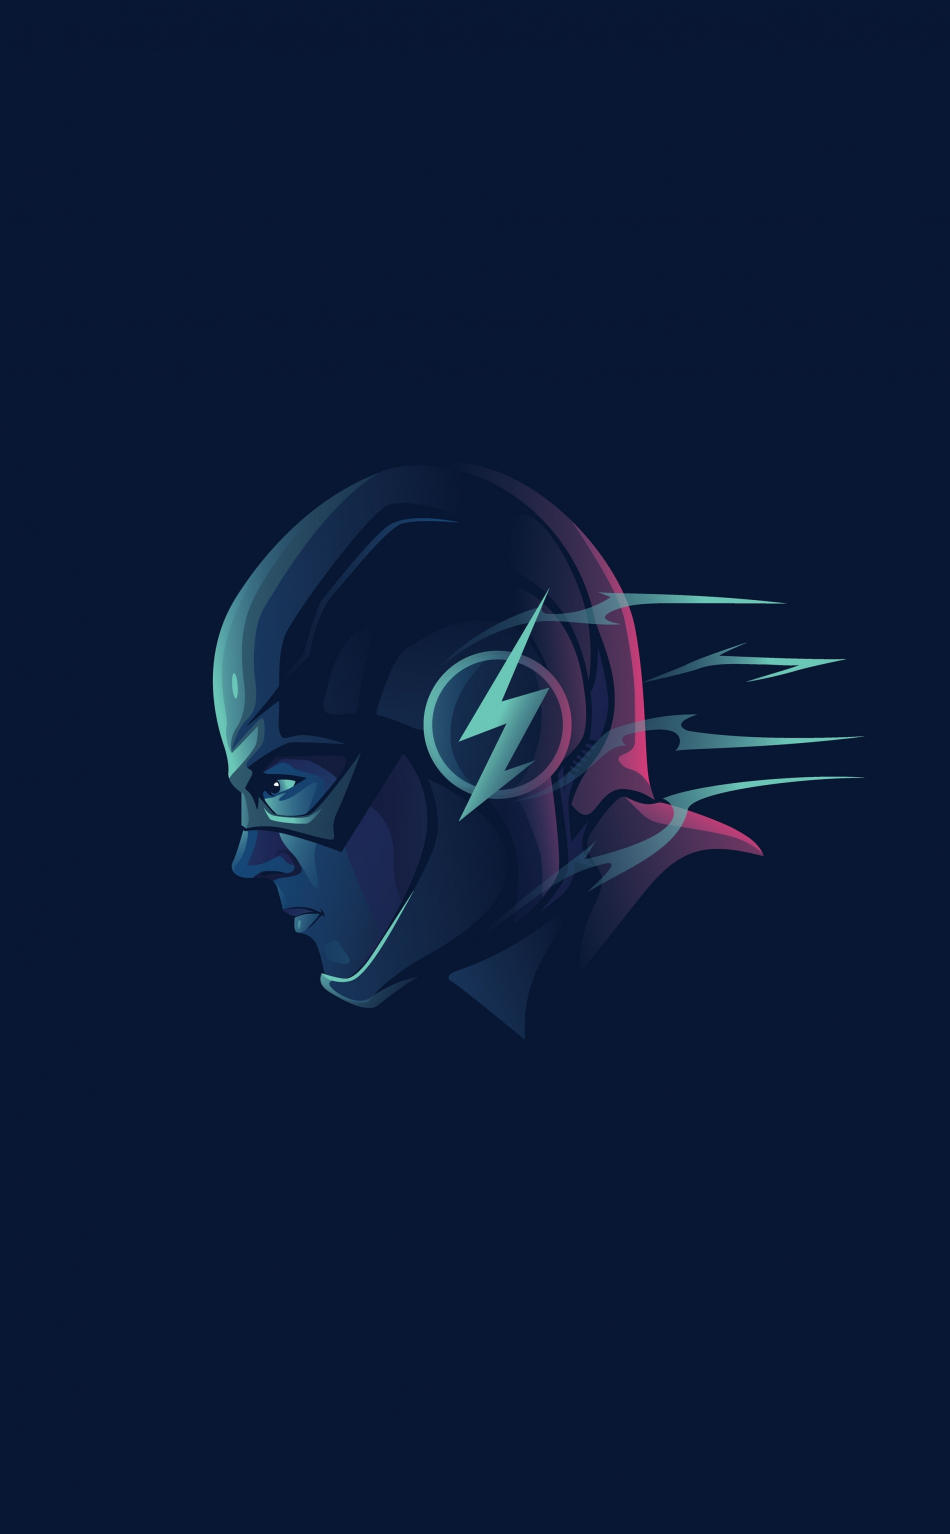 1080x1920 The Flash Wallpapers for IPhone 6S 7 8 Retina HD